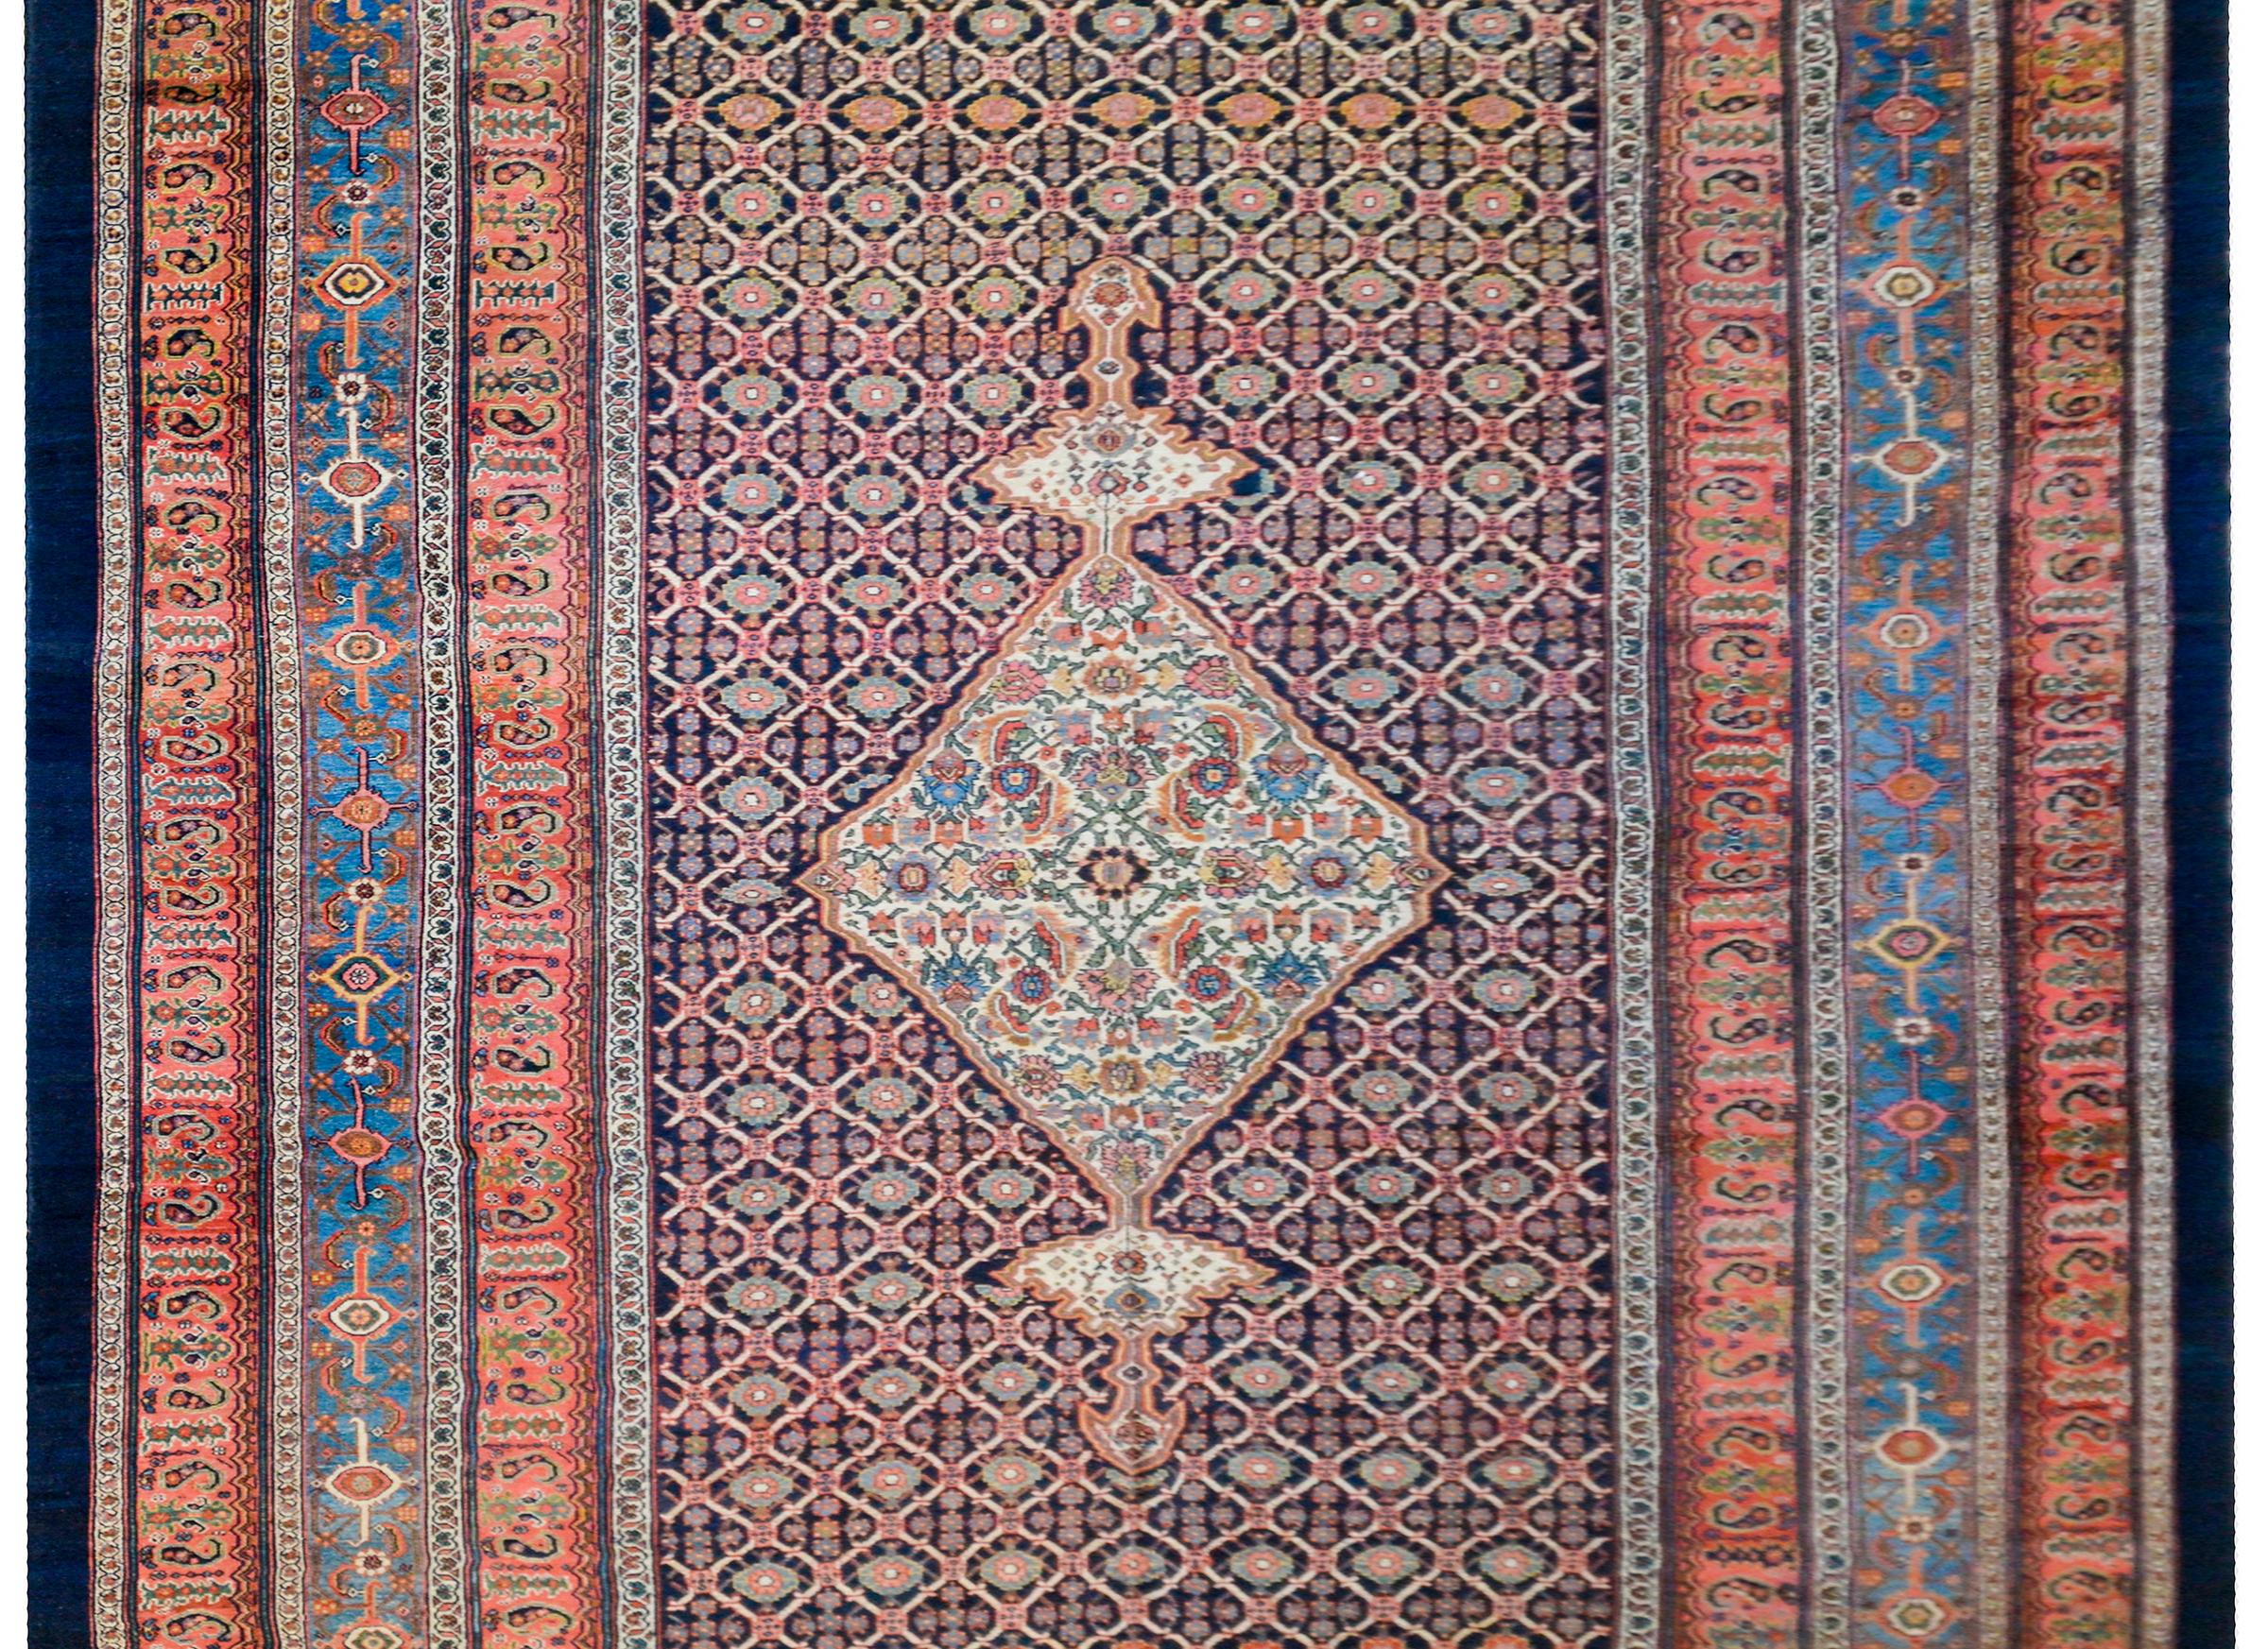 A wonderful late 19th century Persian Bibikibad rug with a fantastic large central diamond medallion with a multicolored floral and vine pattern, on top of an all-over trellis of stylized flowers and vines on a dark indigo background. The border is